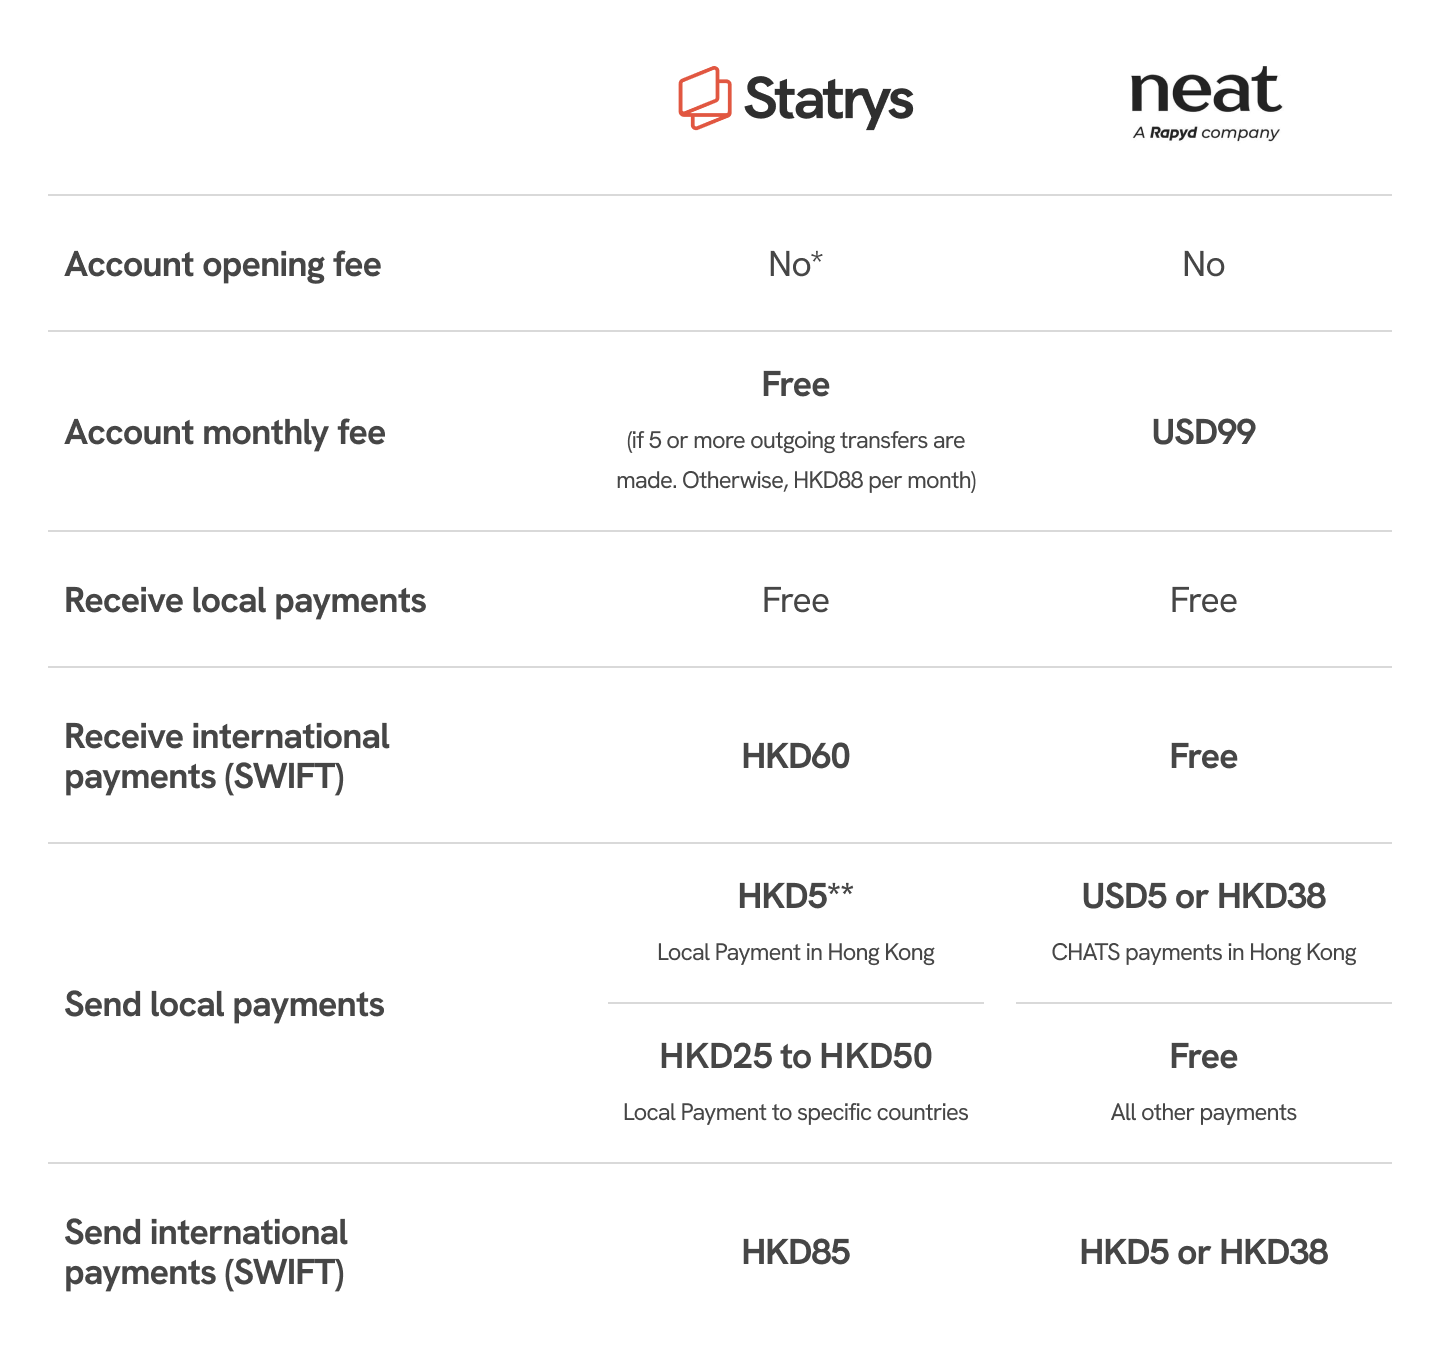 Neat vs Statrys pricing comparison table